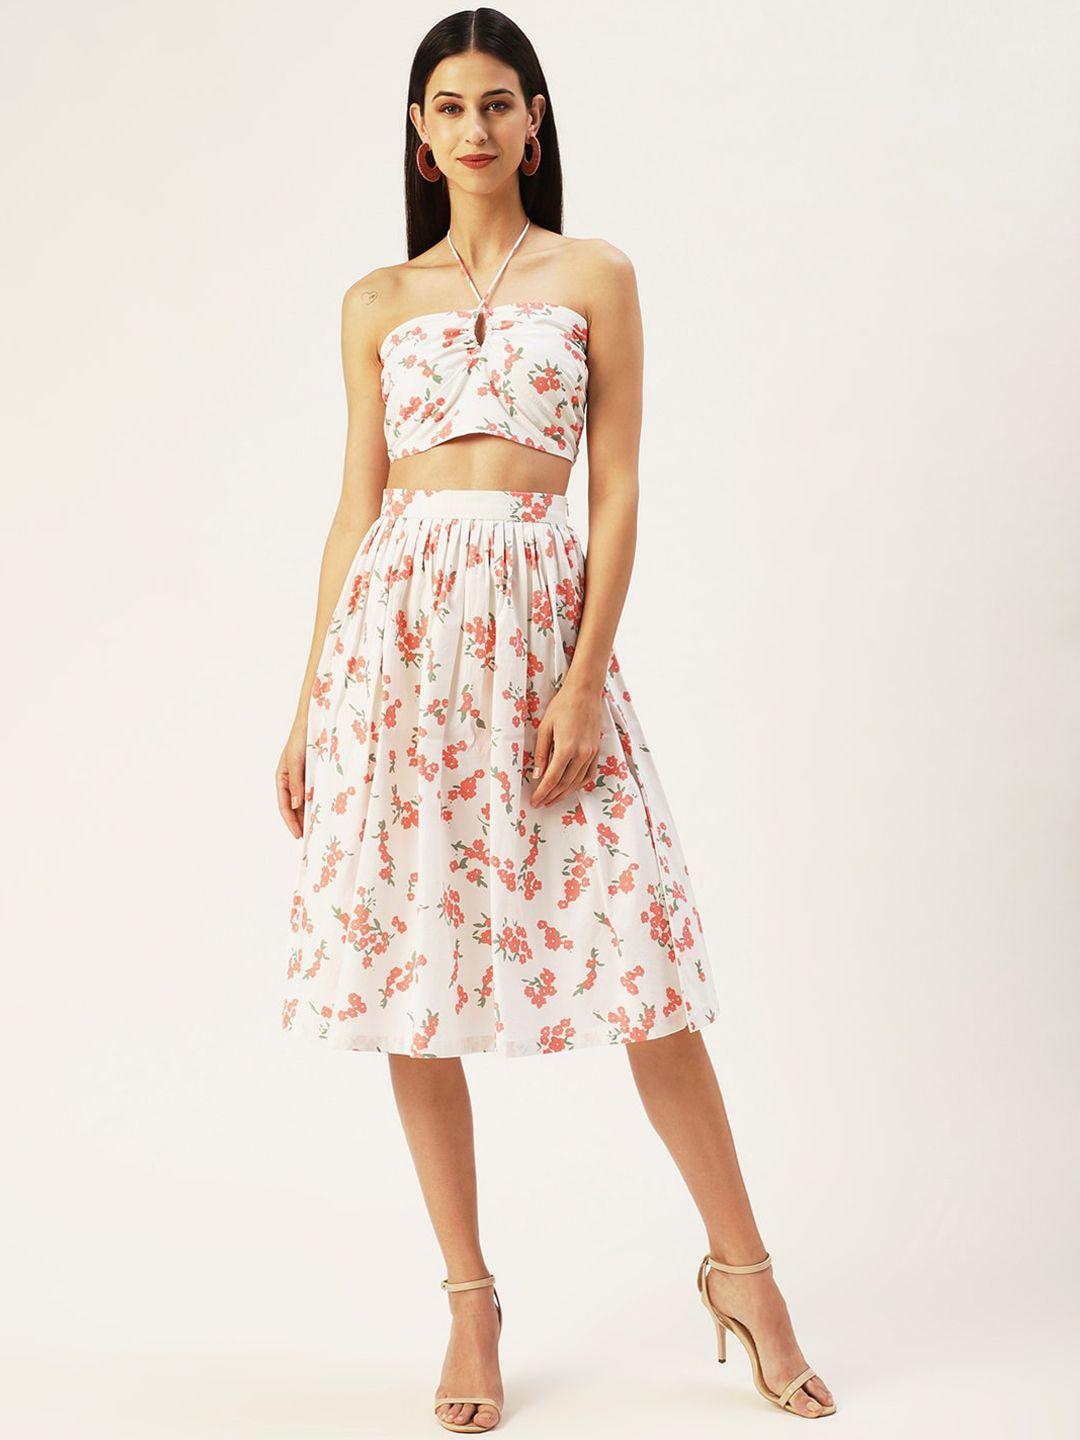 4wrd by dressberry women off white printed co-ords